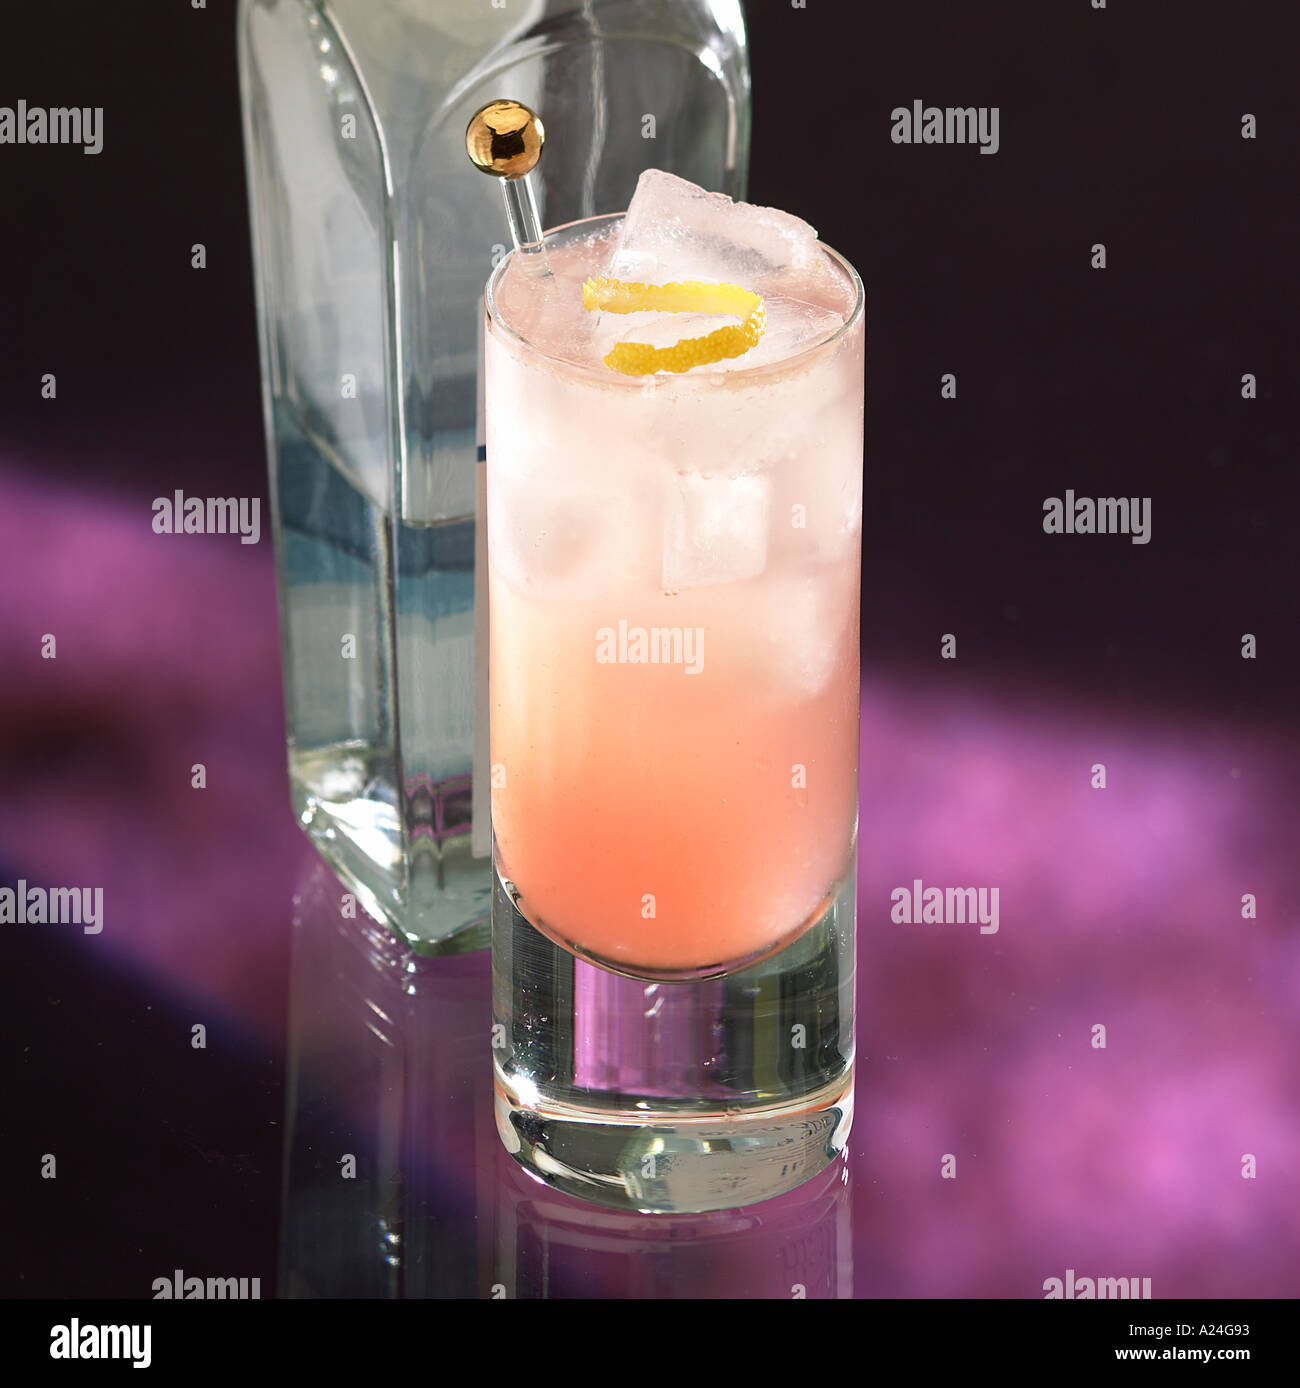 Cocktail Londoner London Dry Gin Fraise Dry Vermouth Lemon juice ice soda water Keywords drink alcohol classic long Stock Photo